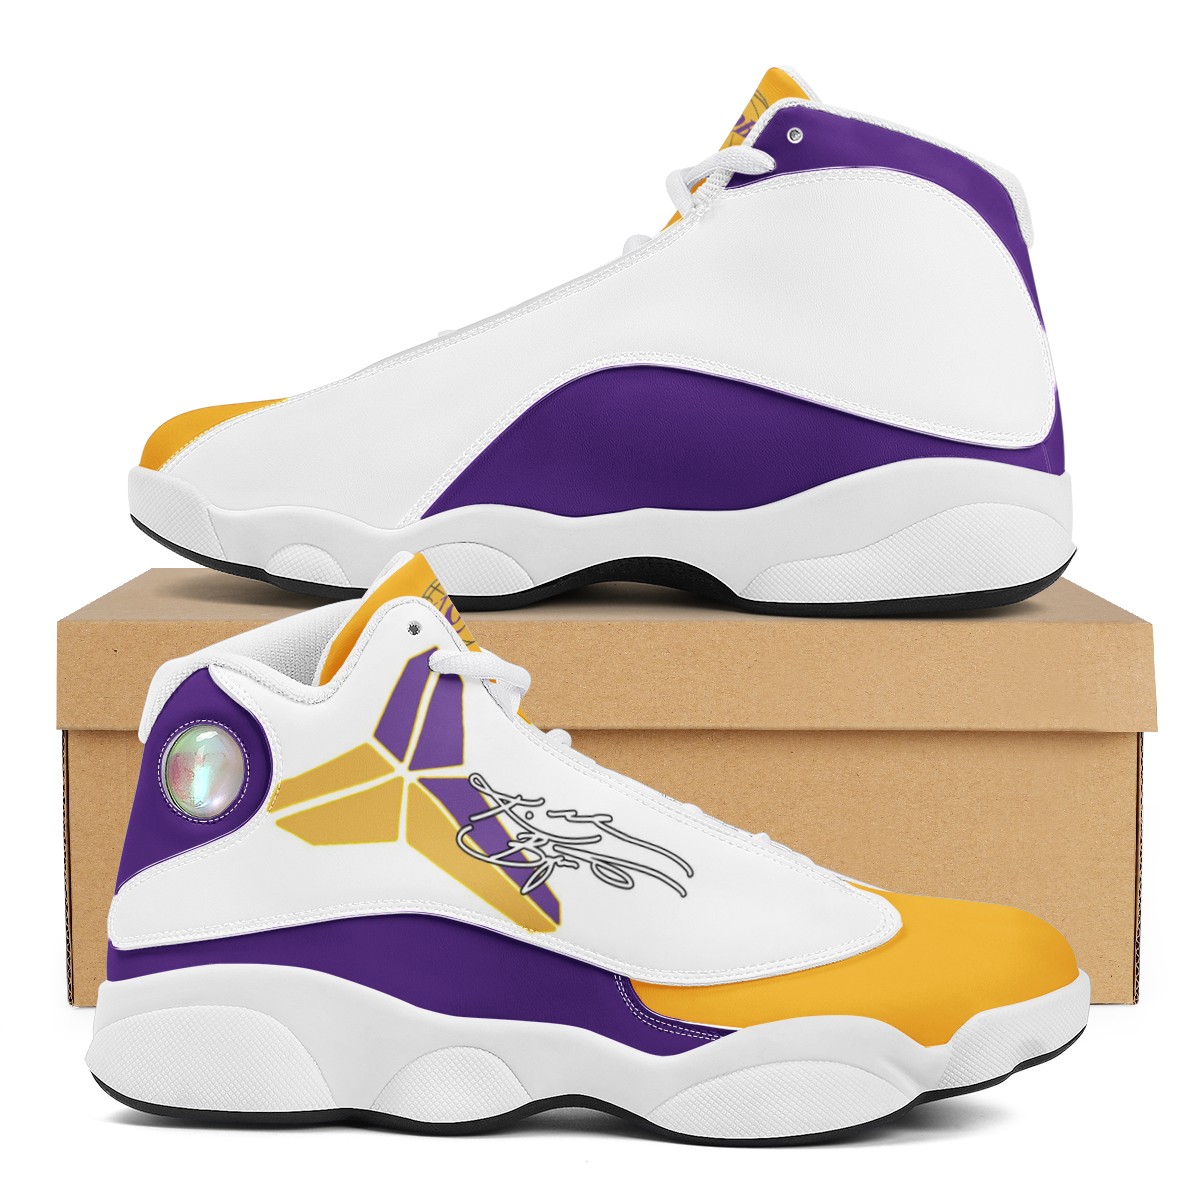 Men's Los Angeles Lakers Limited Edition JD13 Sneakers 002